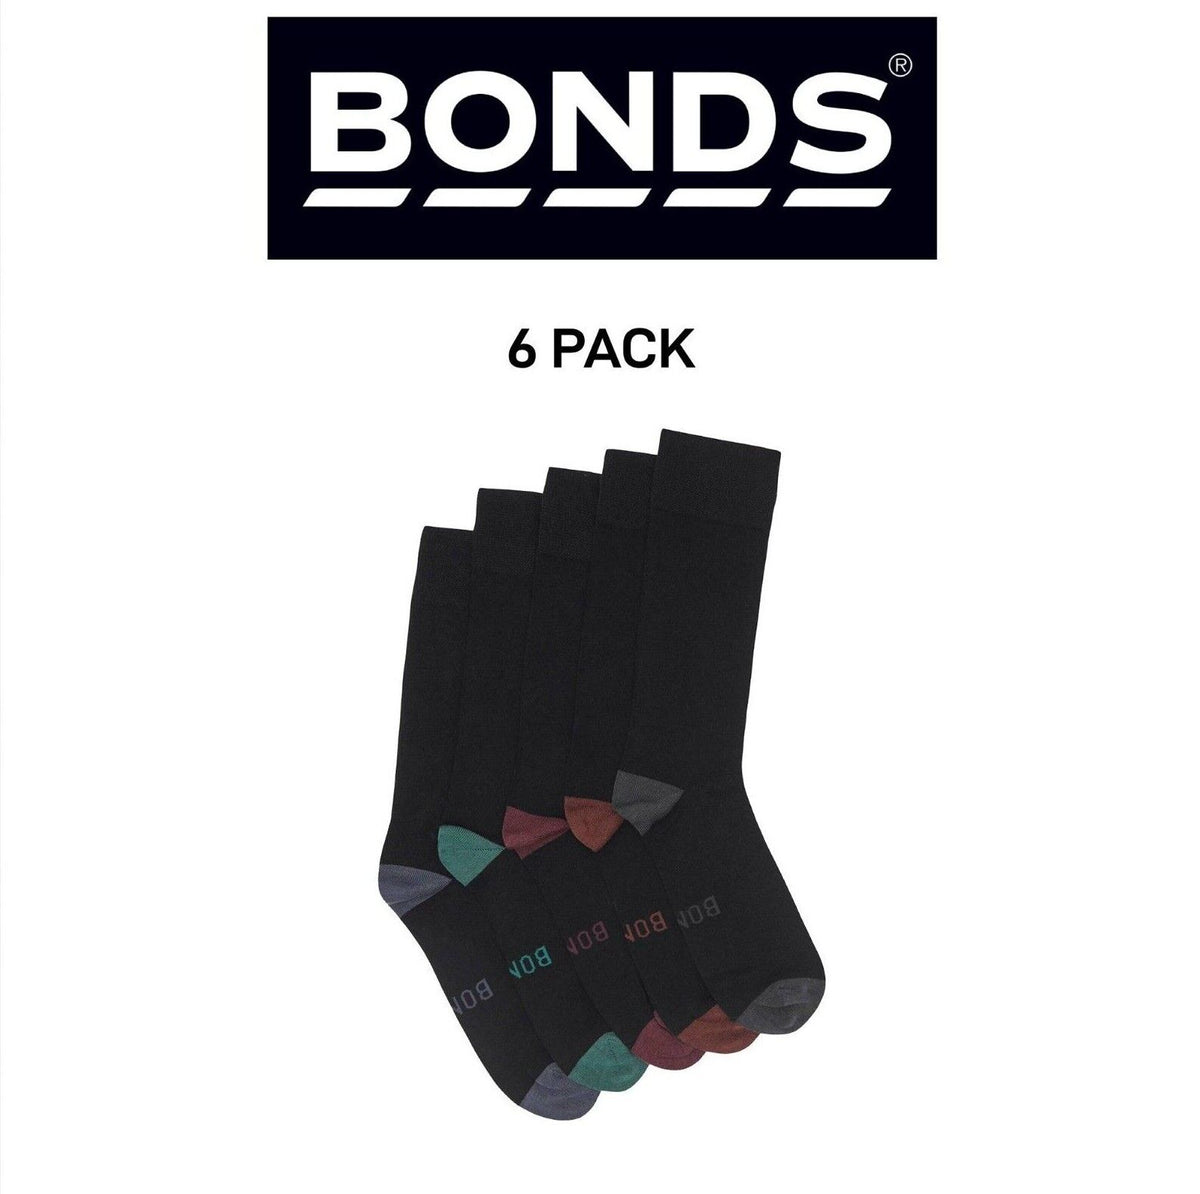 Bonds Mens Bamboo Crew Socks Fine Seams Comfy Toes & Ankle Support 6 Pack SZFQ5W